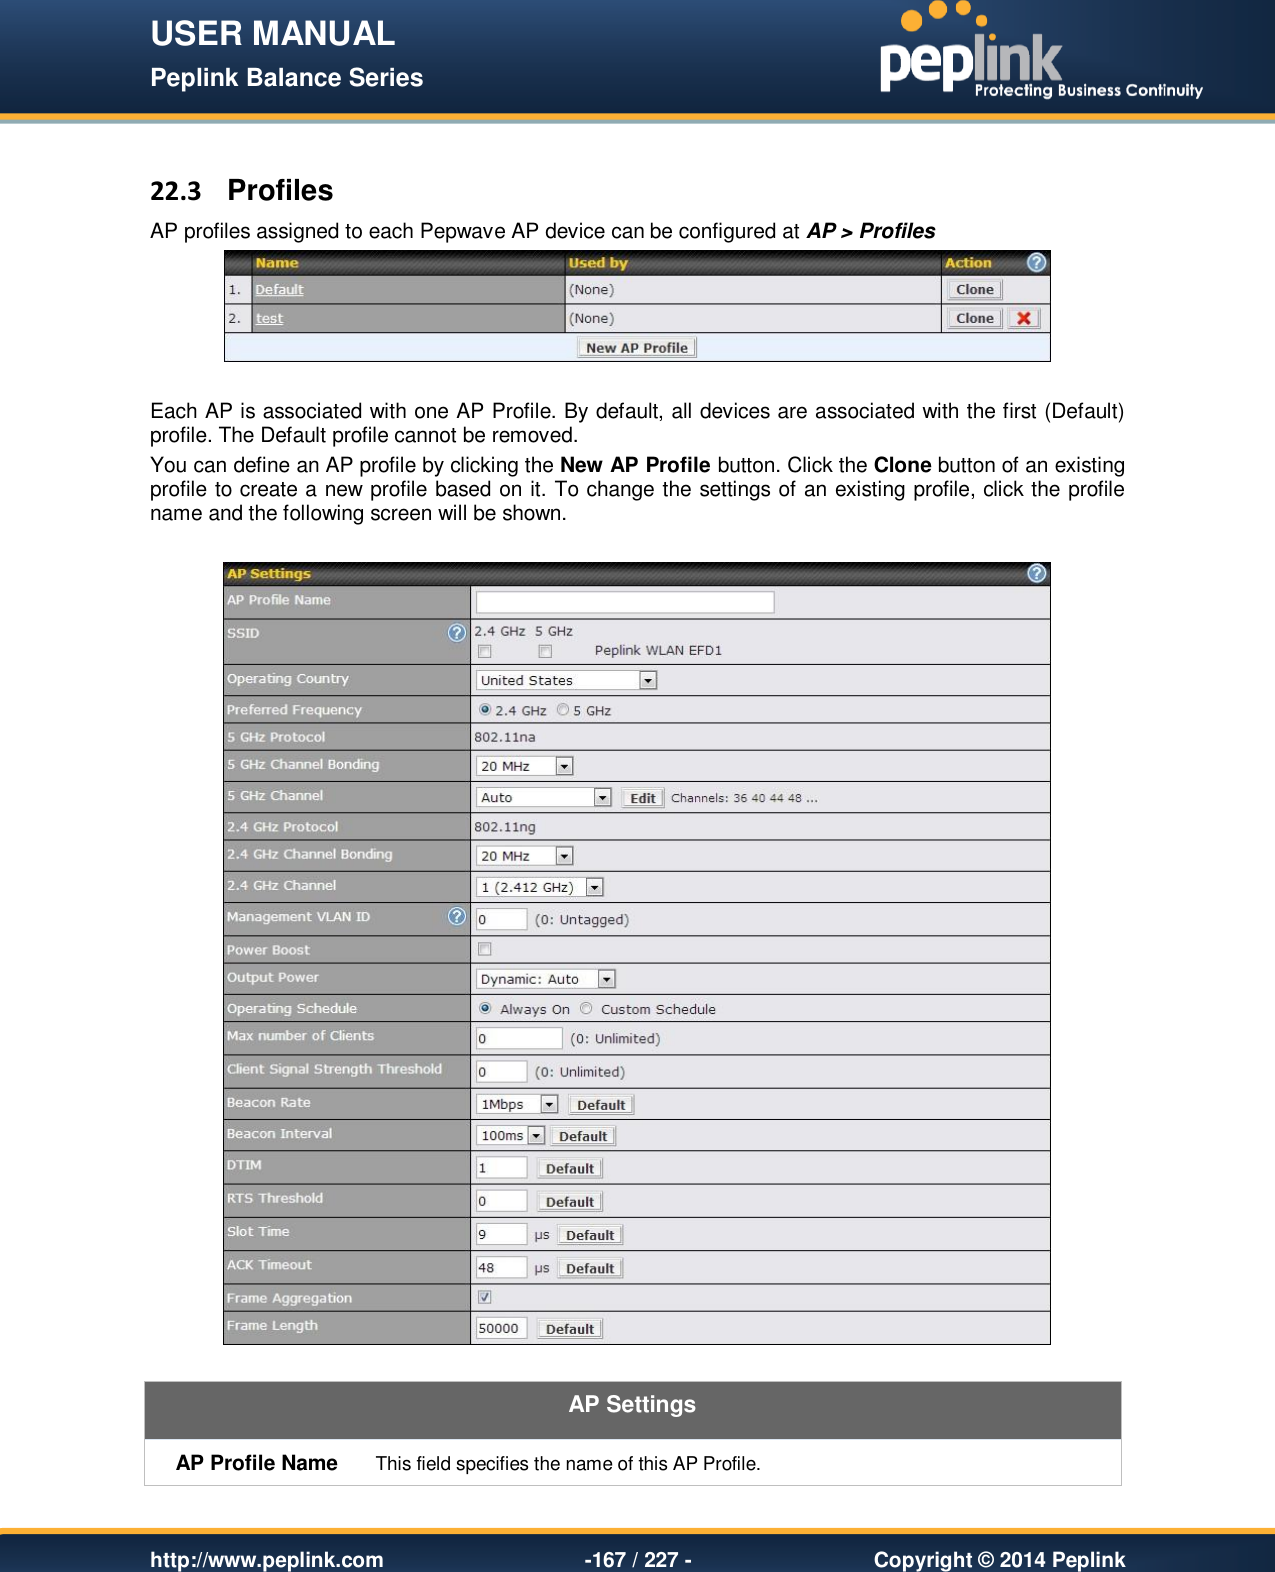 USER MANUAL Peplink Balance Series   http://www.peplink.com -167 / 227 -  Copyright © 2014 Peplink  22.3  Profiles AP profiles assigned to each Pepwave AP device can be configured at AP &gt; Profiles   Each AP is associated with one AP Profile. By default, all devices are associated with the first (Default) profile. The Default profile cannot be removed.  You can define an AP profile by clicking the New AP Profile button. Click the Clone button of an existing profile to create a new profile based on it. To change the settings of an existing profile, click the profile name and the following screen will be shown.    AP Settings AP Profile Name This field specifies the name of this AP Profile. 